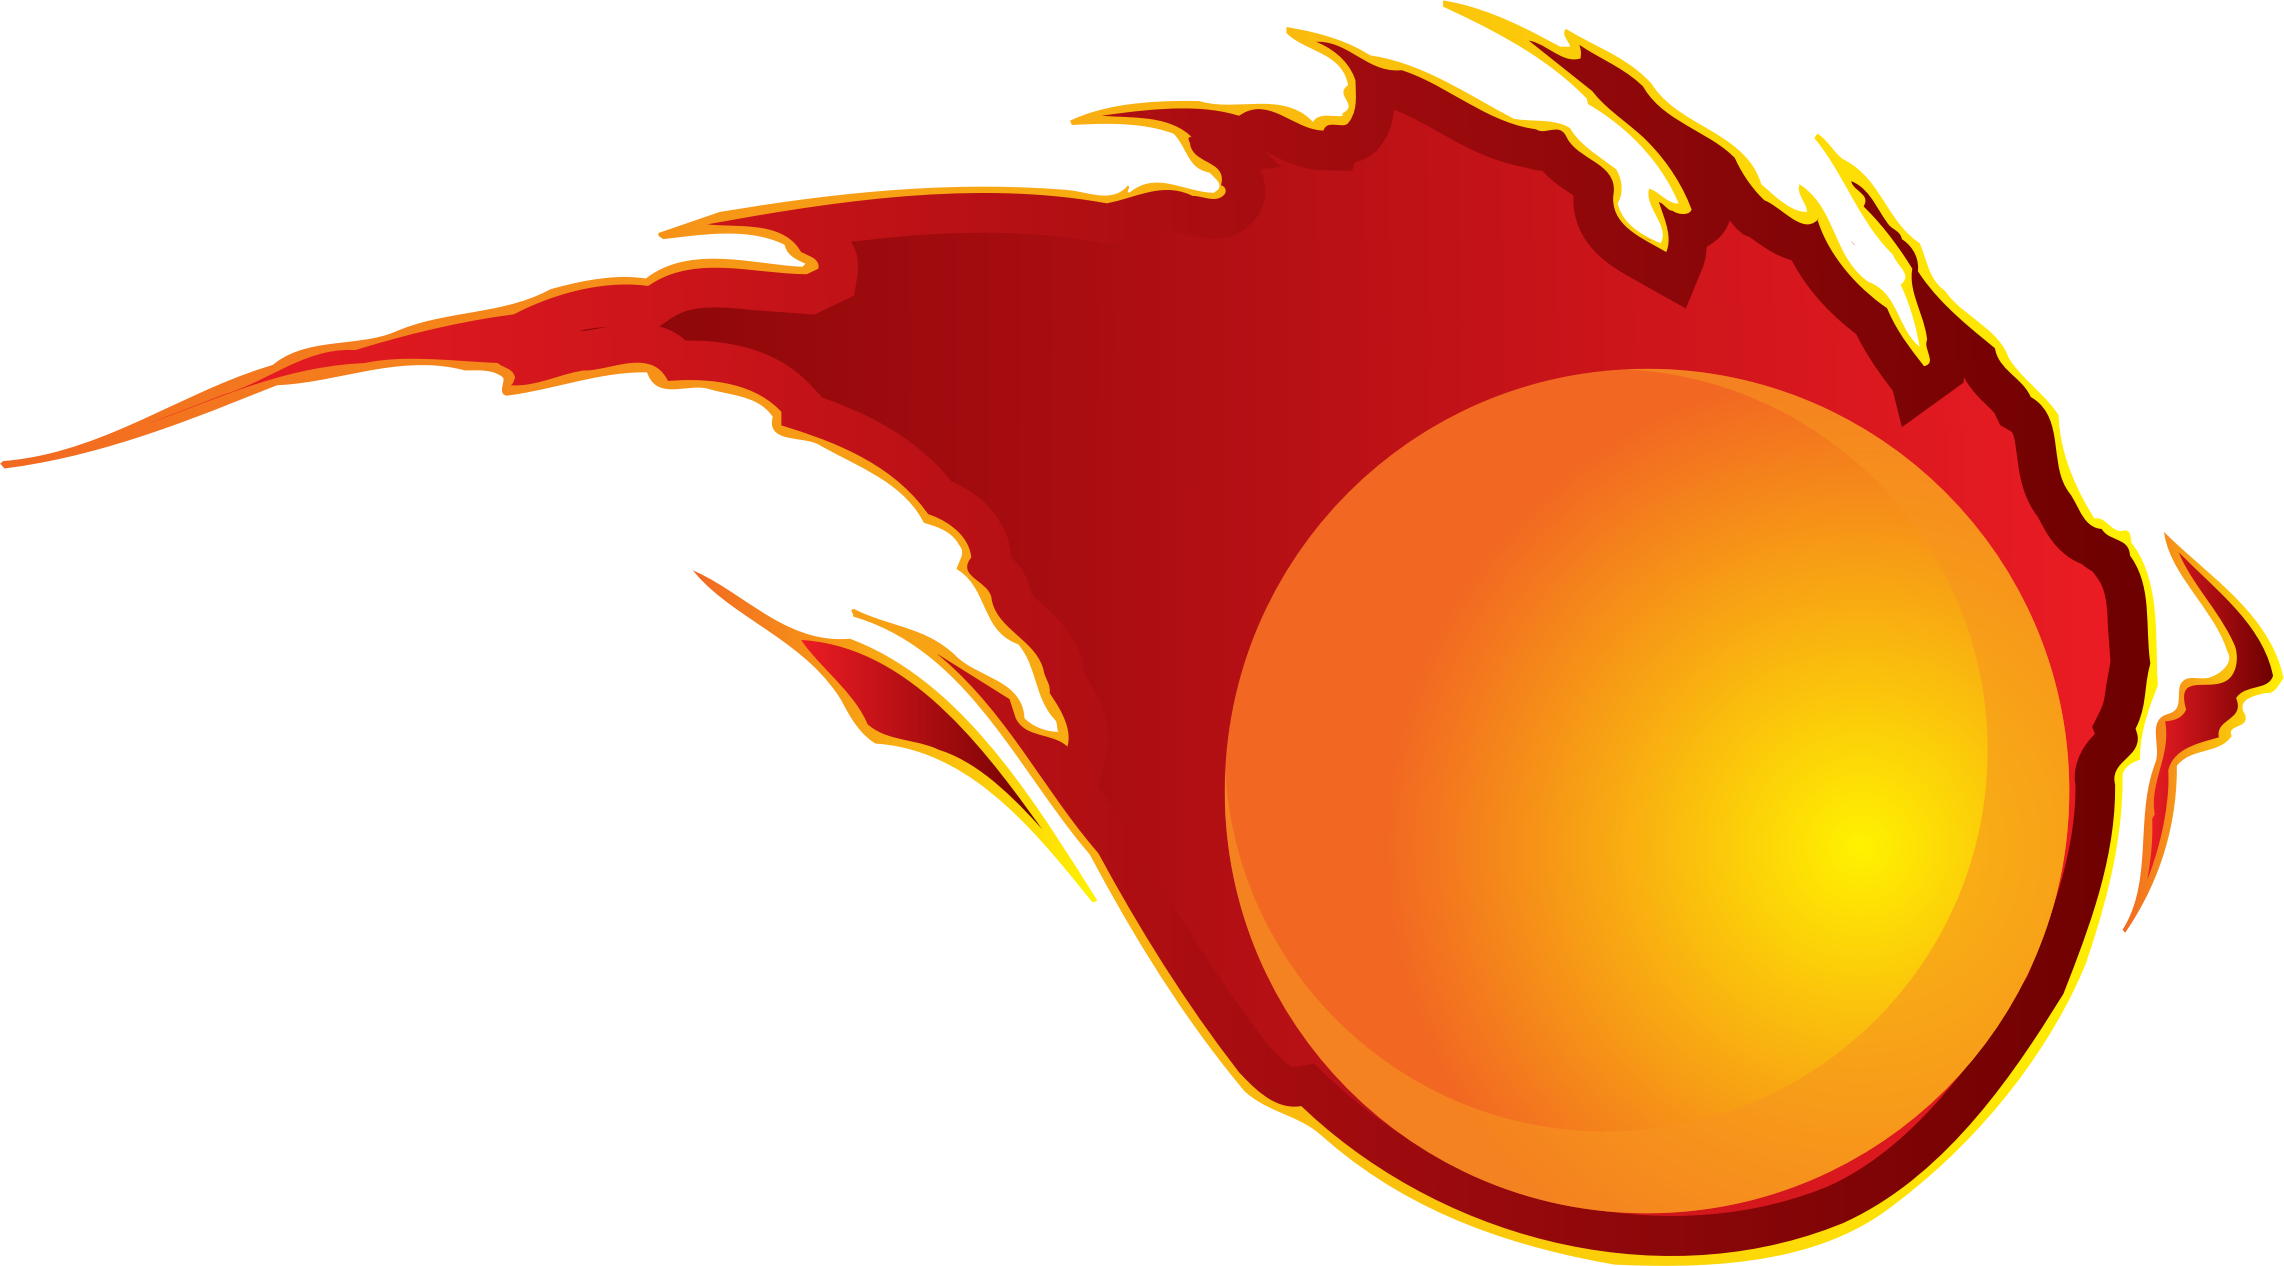 Huge Ball Of Fire PNG HD Quality